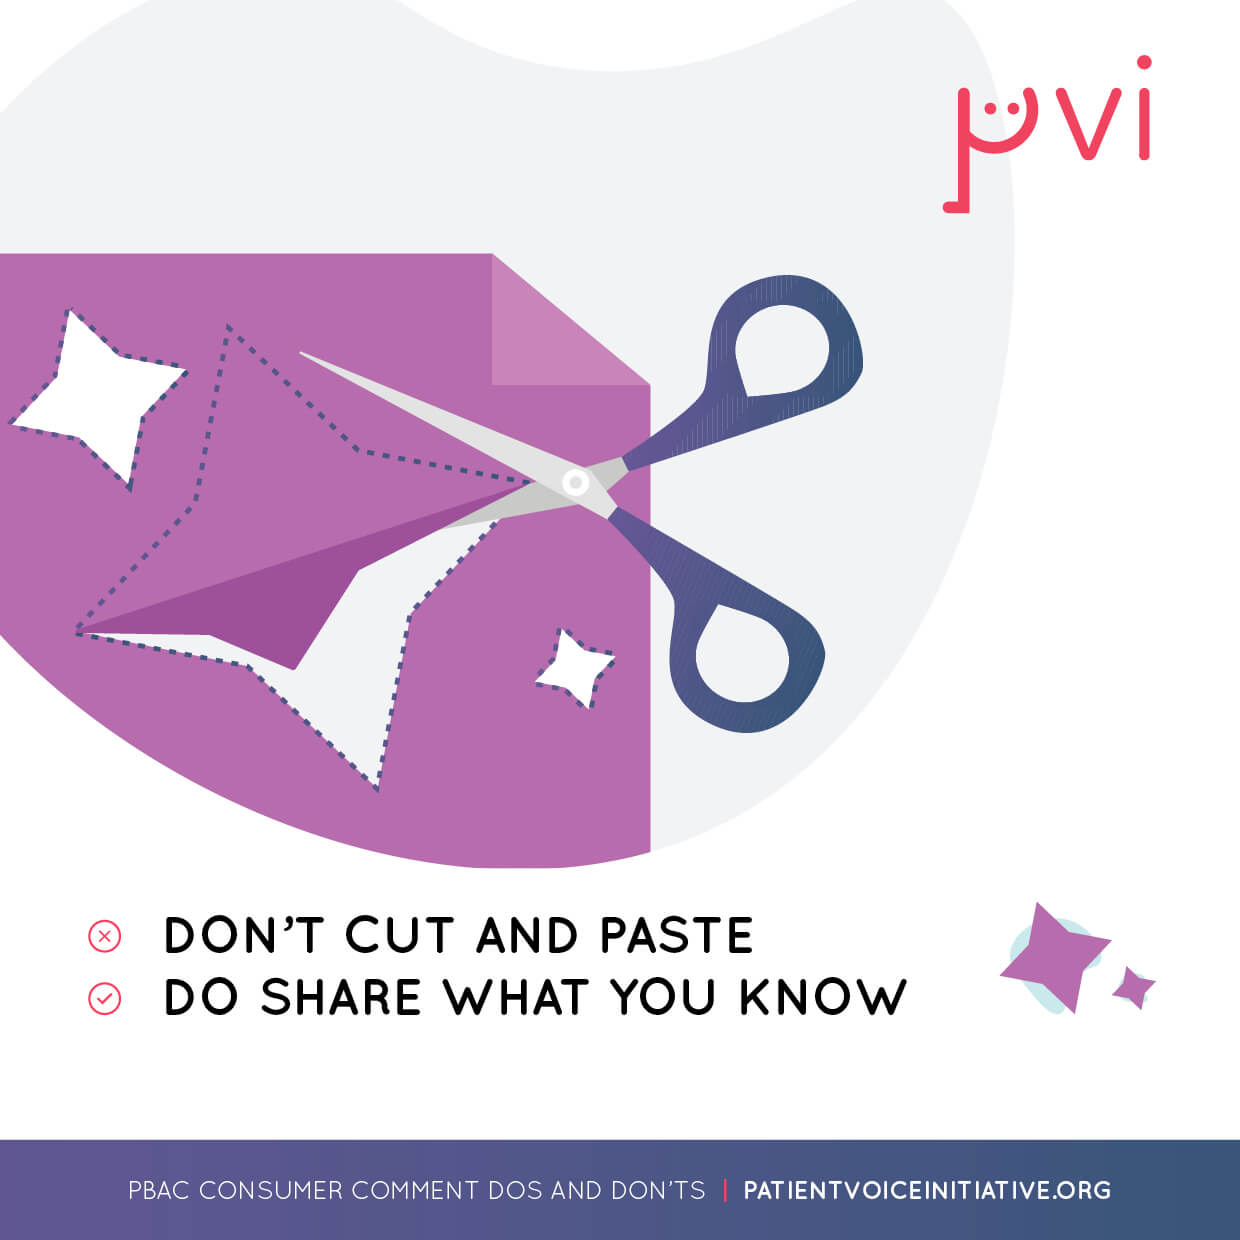 Tile with scissors for PBAC submission tips with text saying don't cut and paste and do share what you know